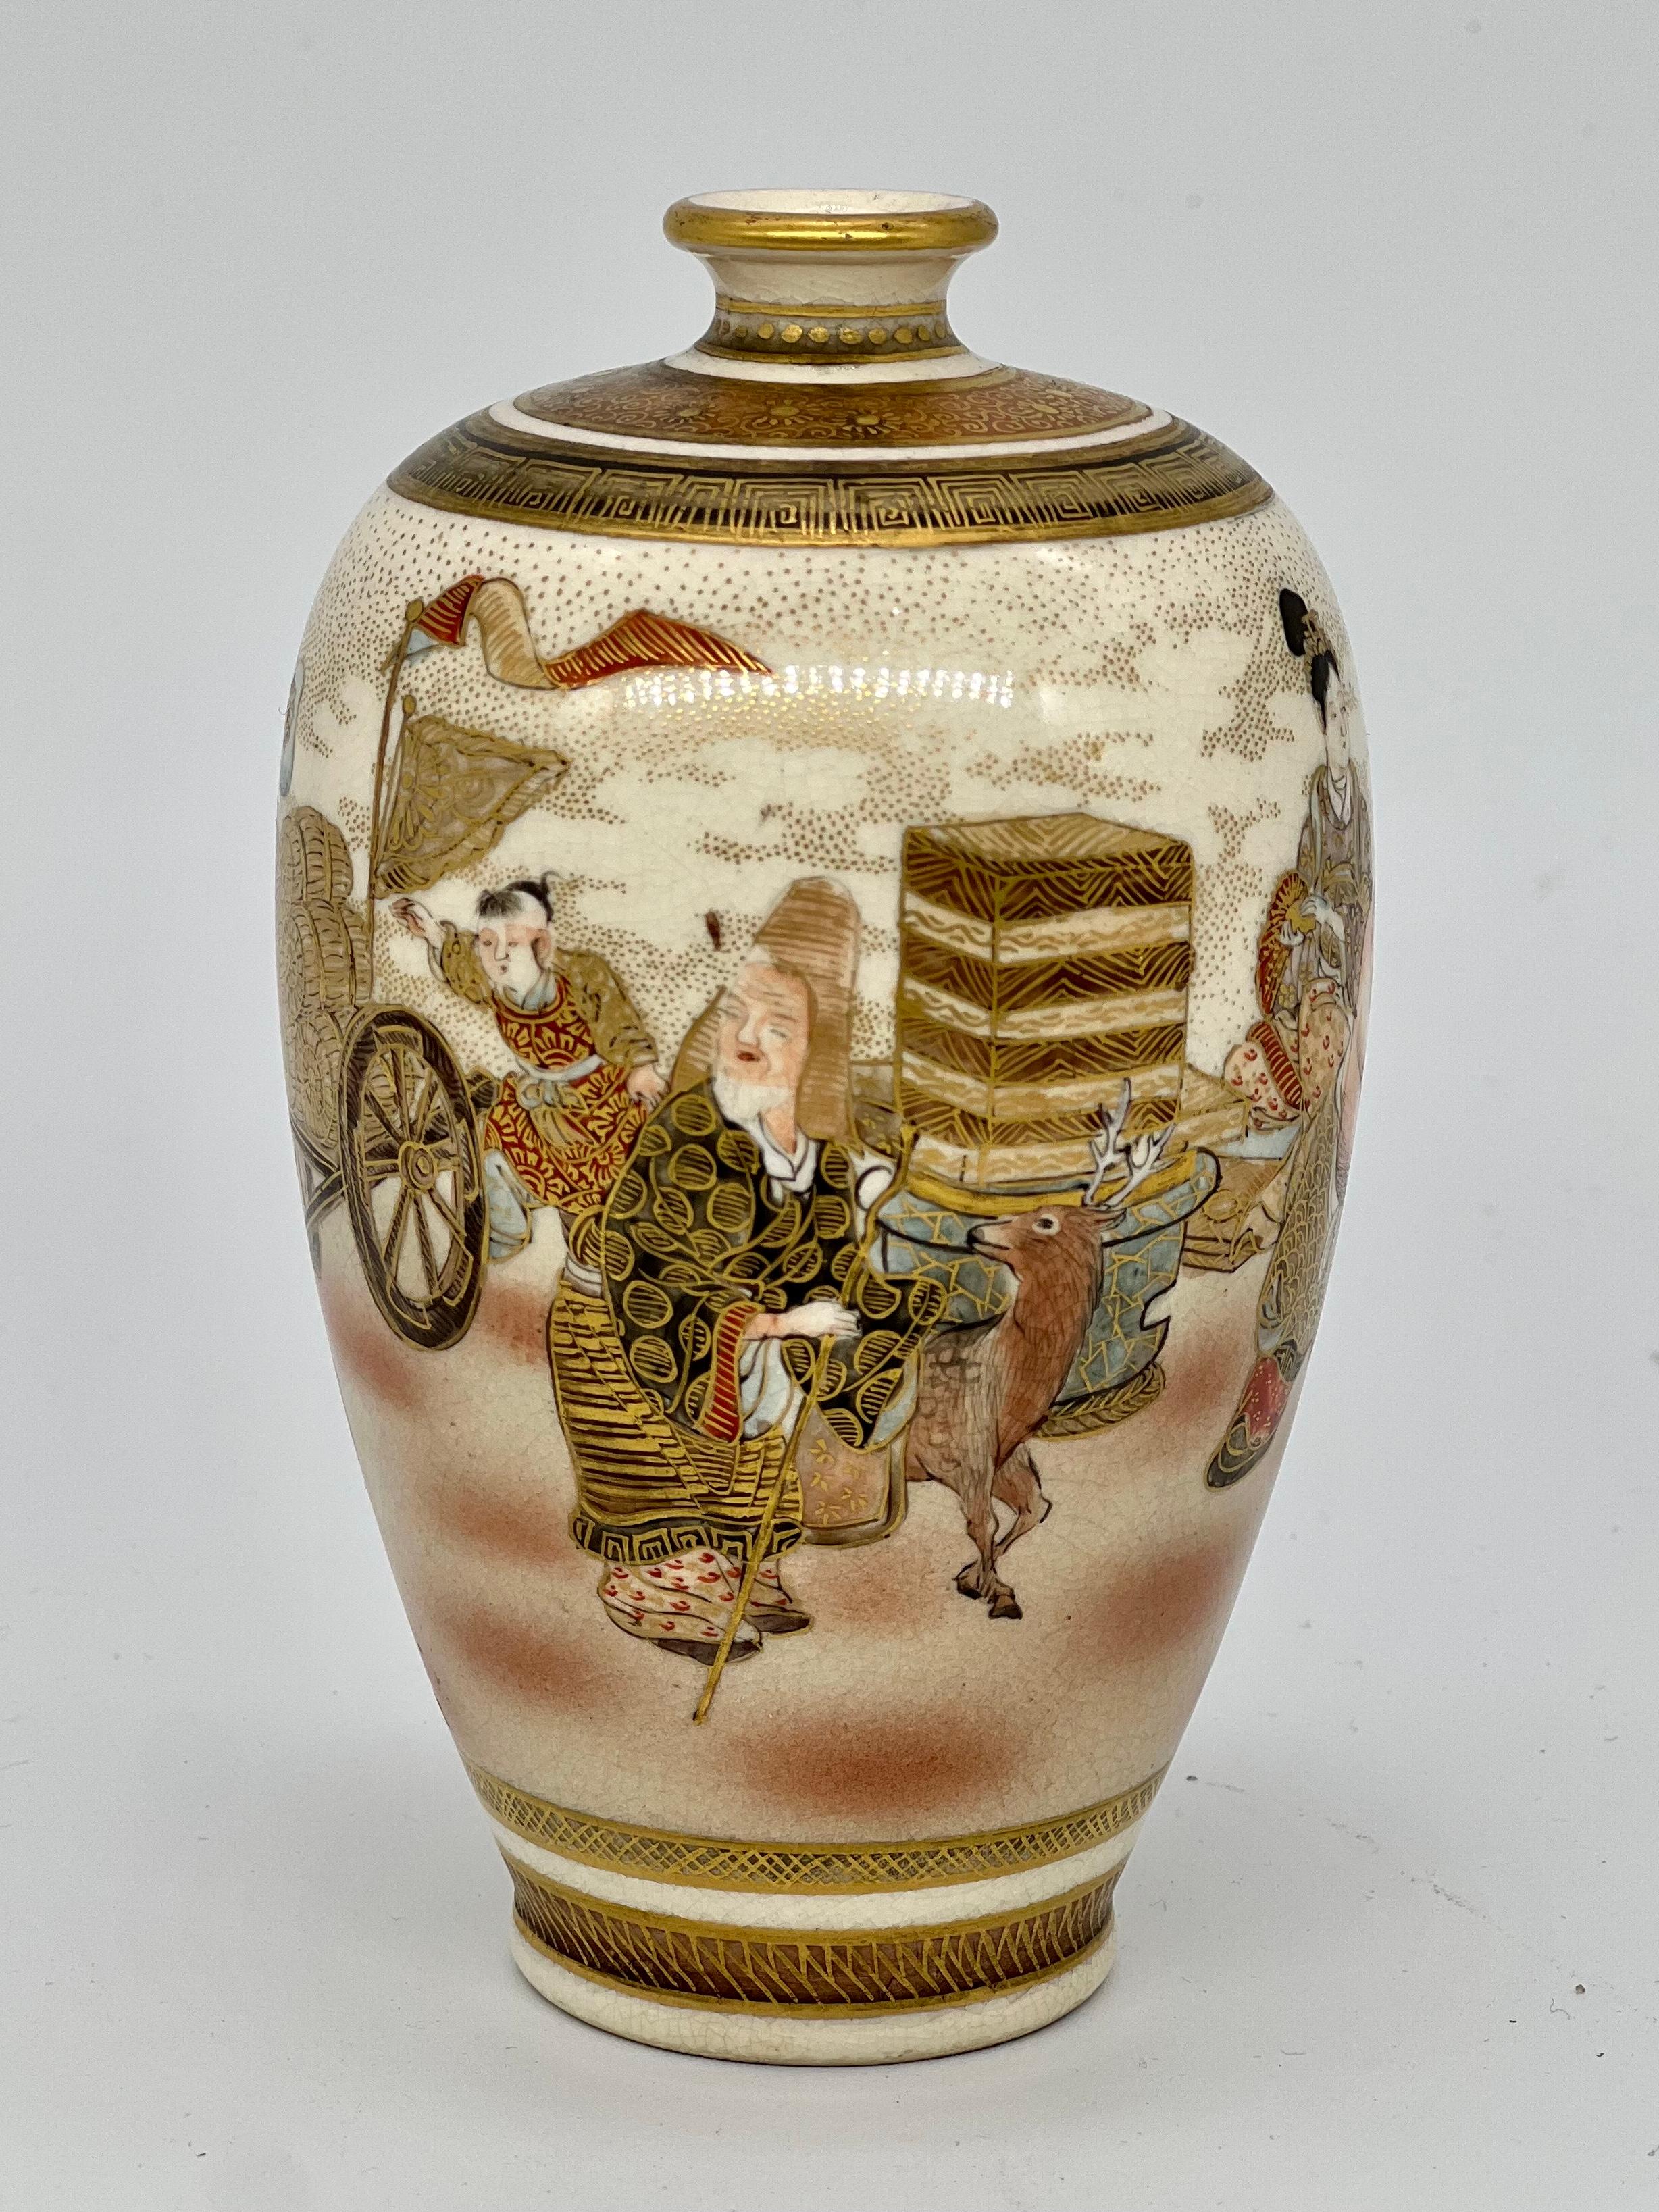 A Fine Antique Japanese Satsuma Ovoid Vase. Signed-Dozan. Meiji era (1868-1912), late 19th century.

Decorated in enamels and gilt with a continuous scene depicting the Shichifukujin (Seven Gods of Good Fortune) making mochi (rice cakes) during